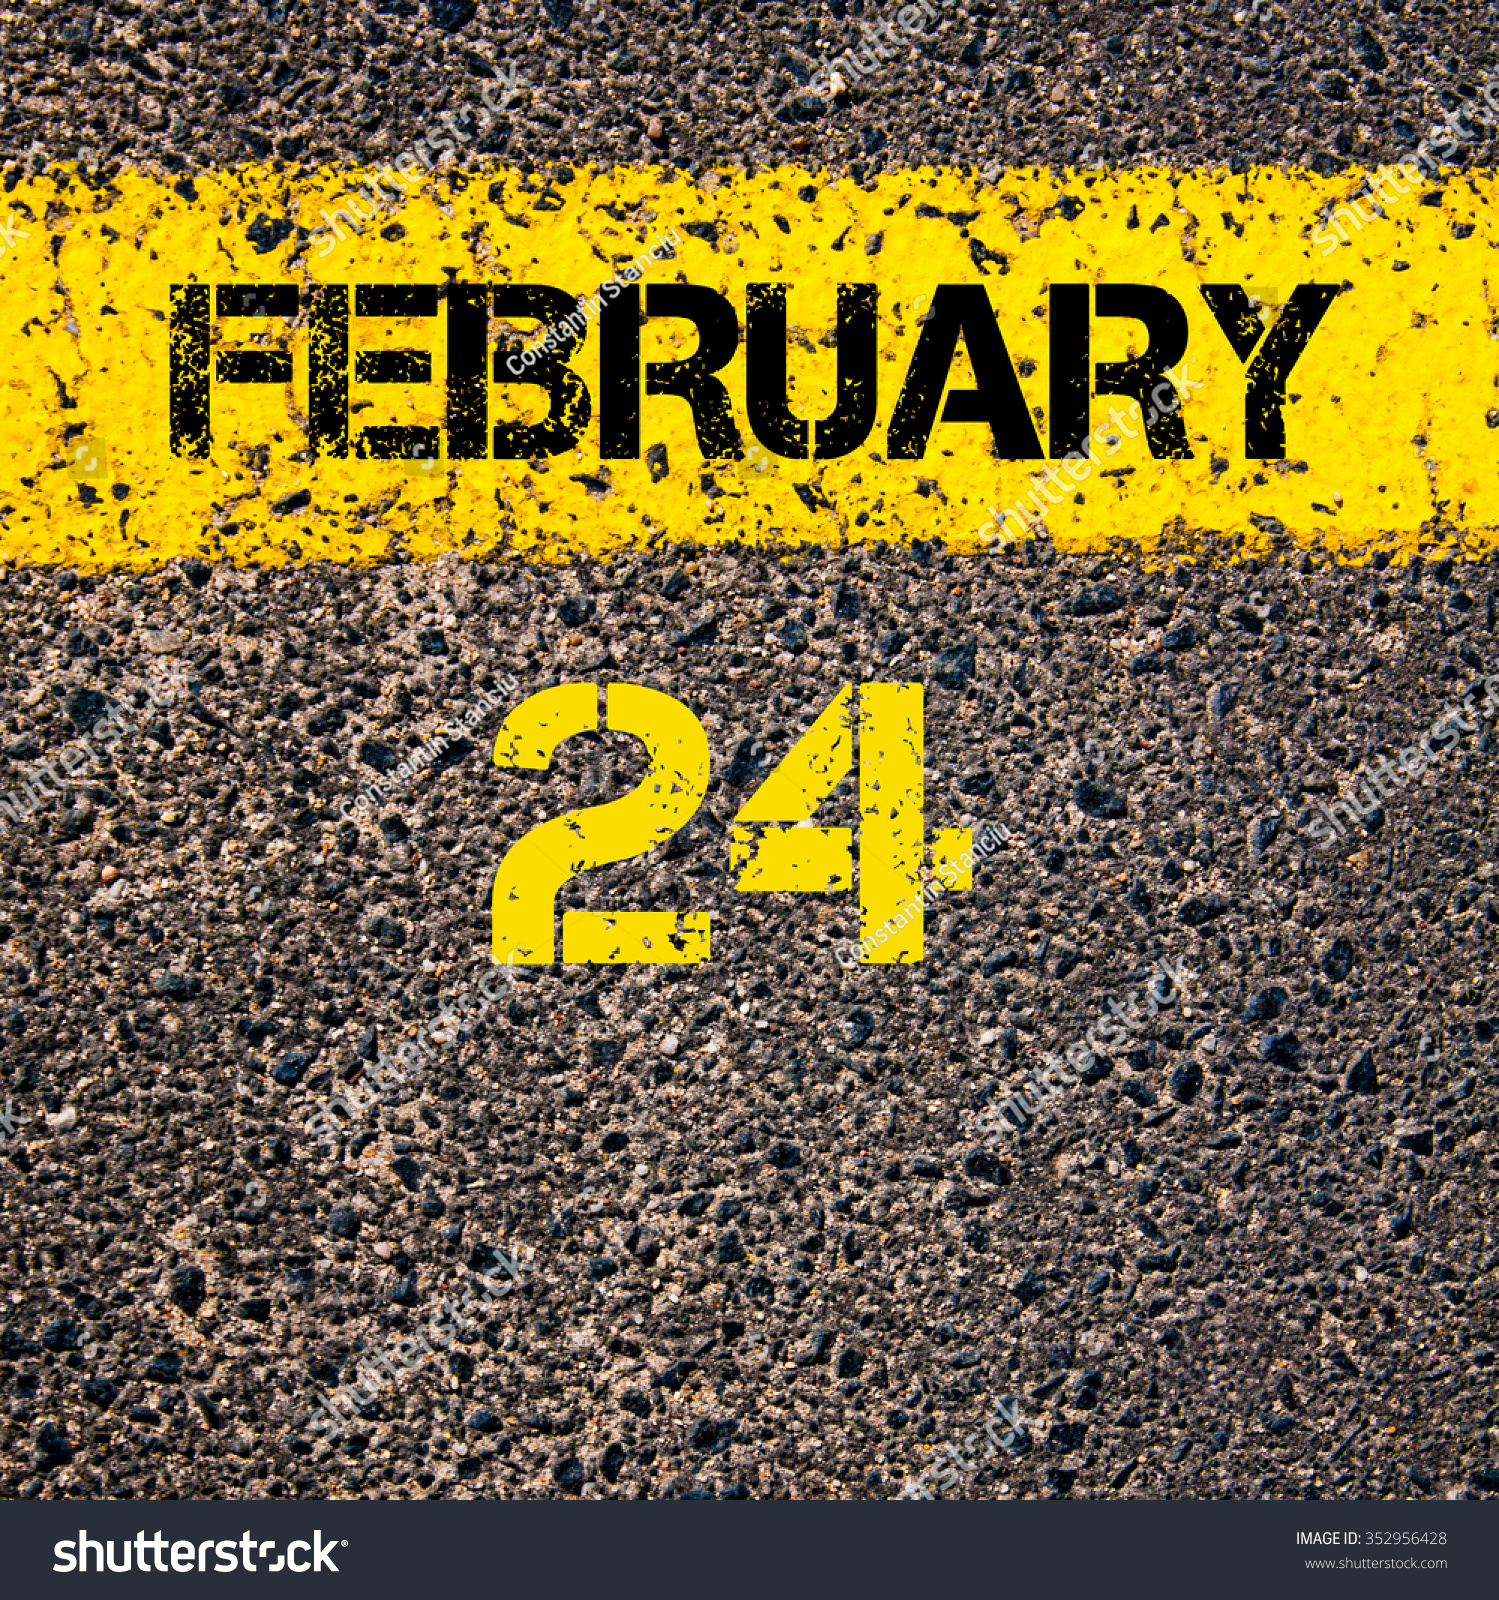 All 103+ Images what day is the 24 of february Updated